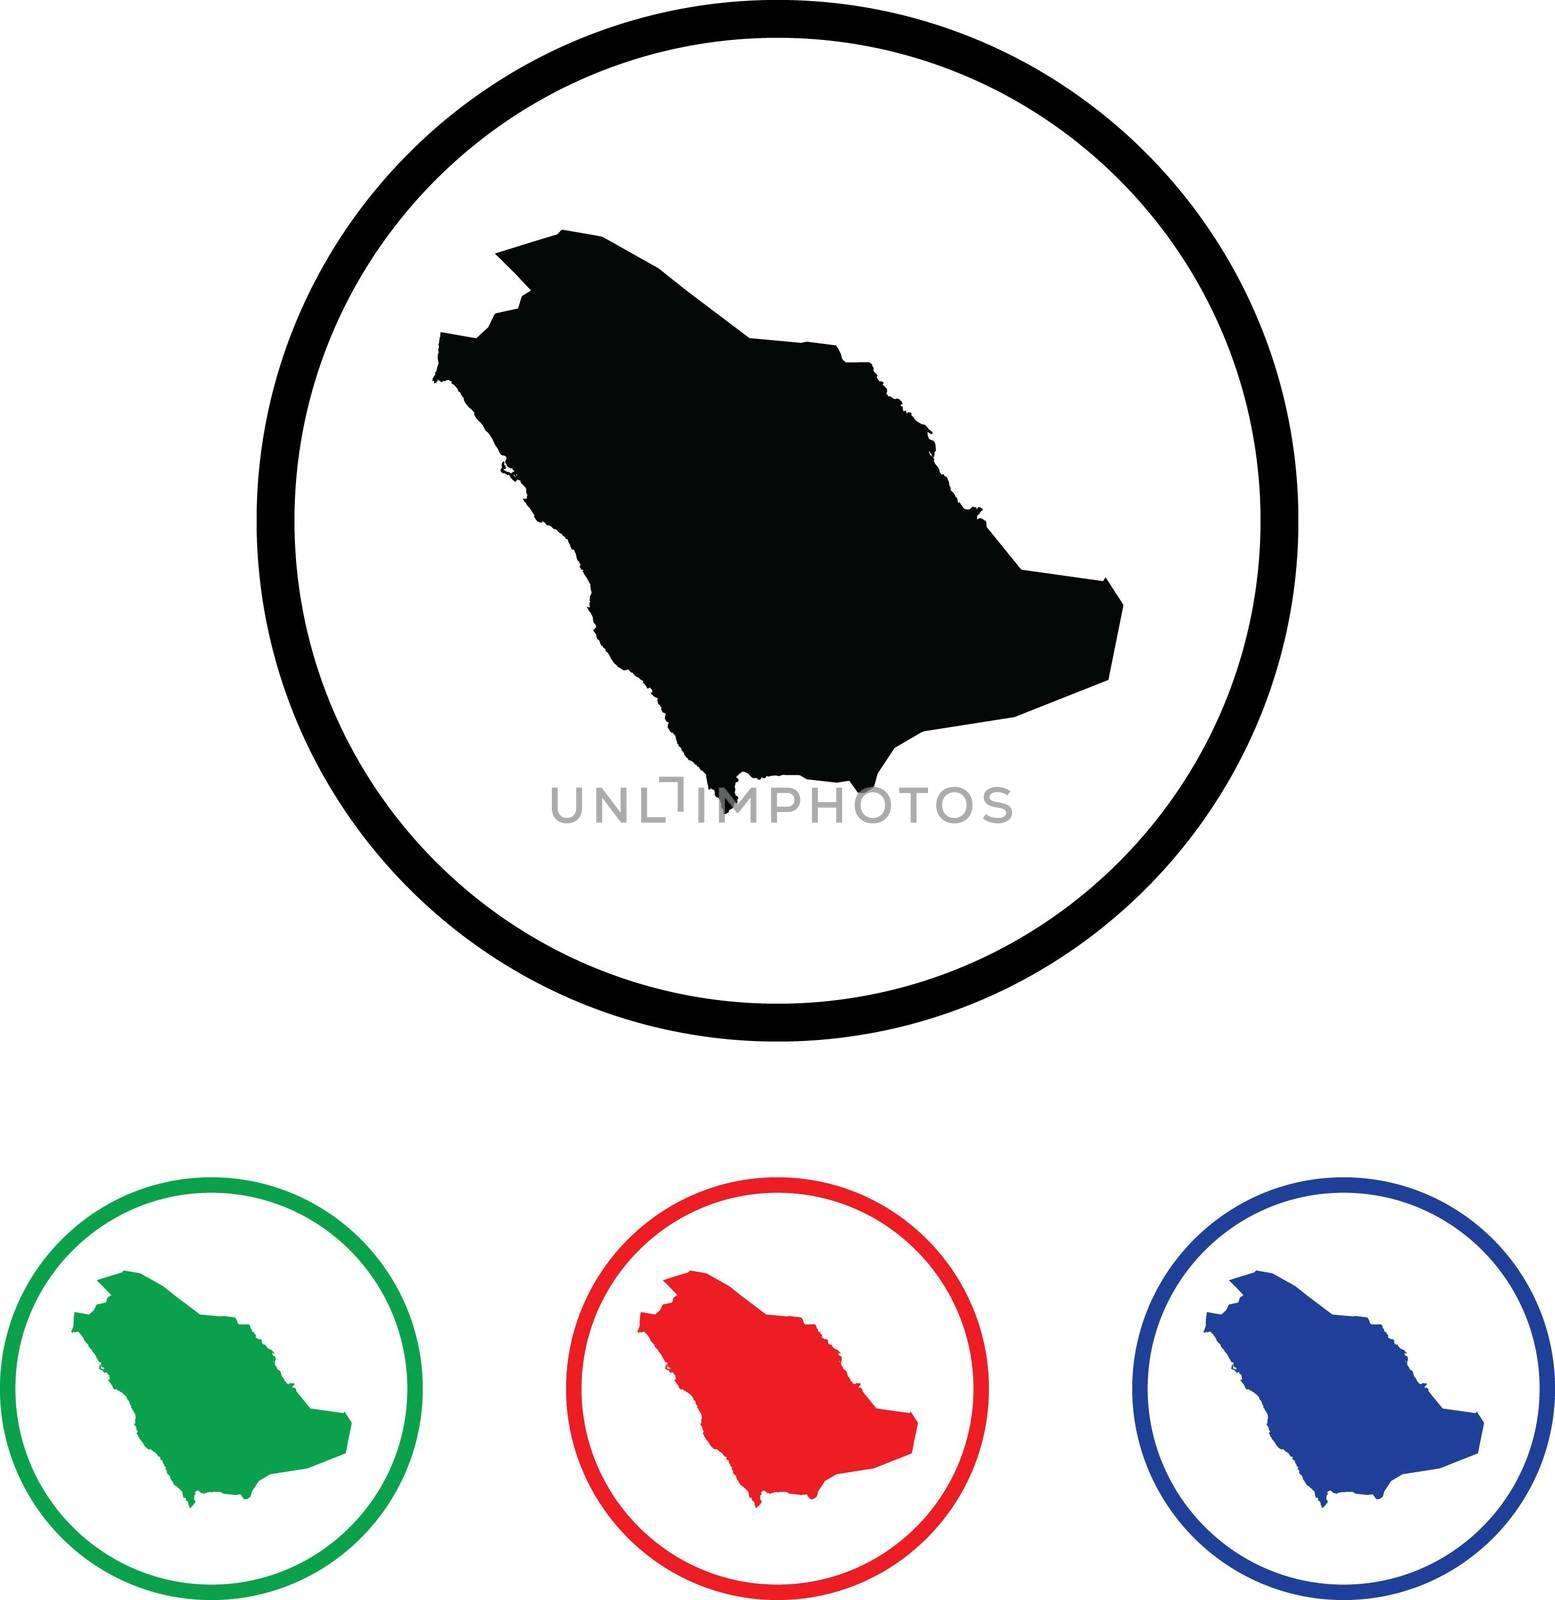 Saudi Arabia Icon Illustration with Four Color Variations